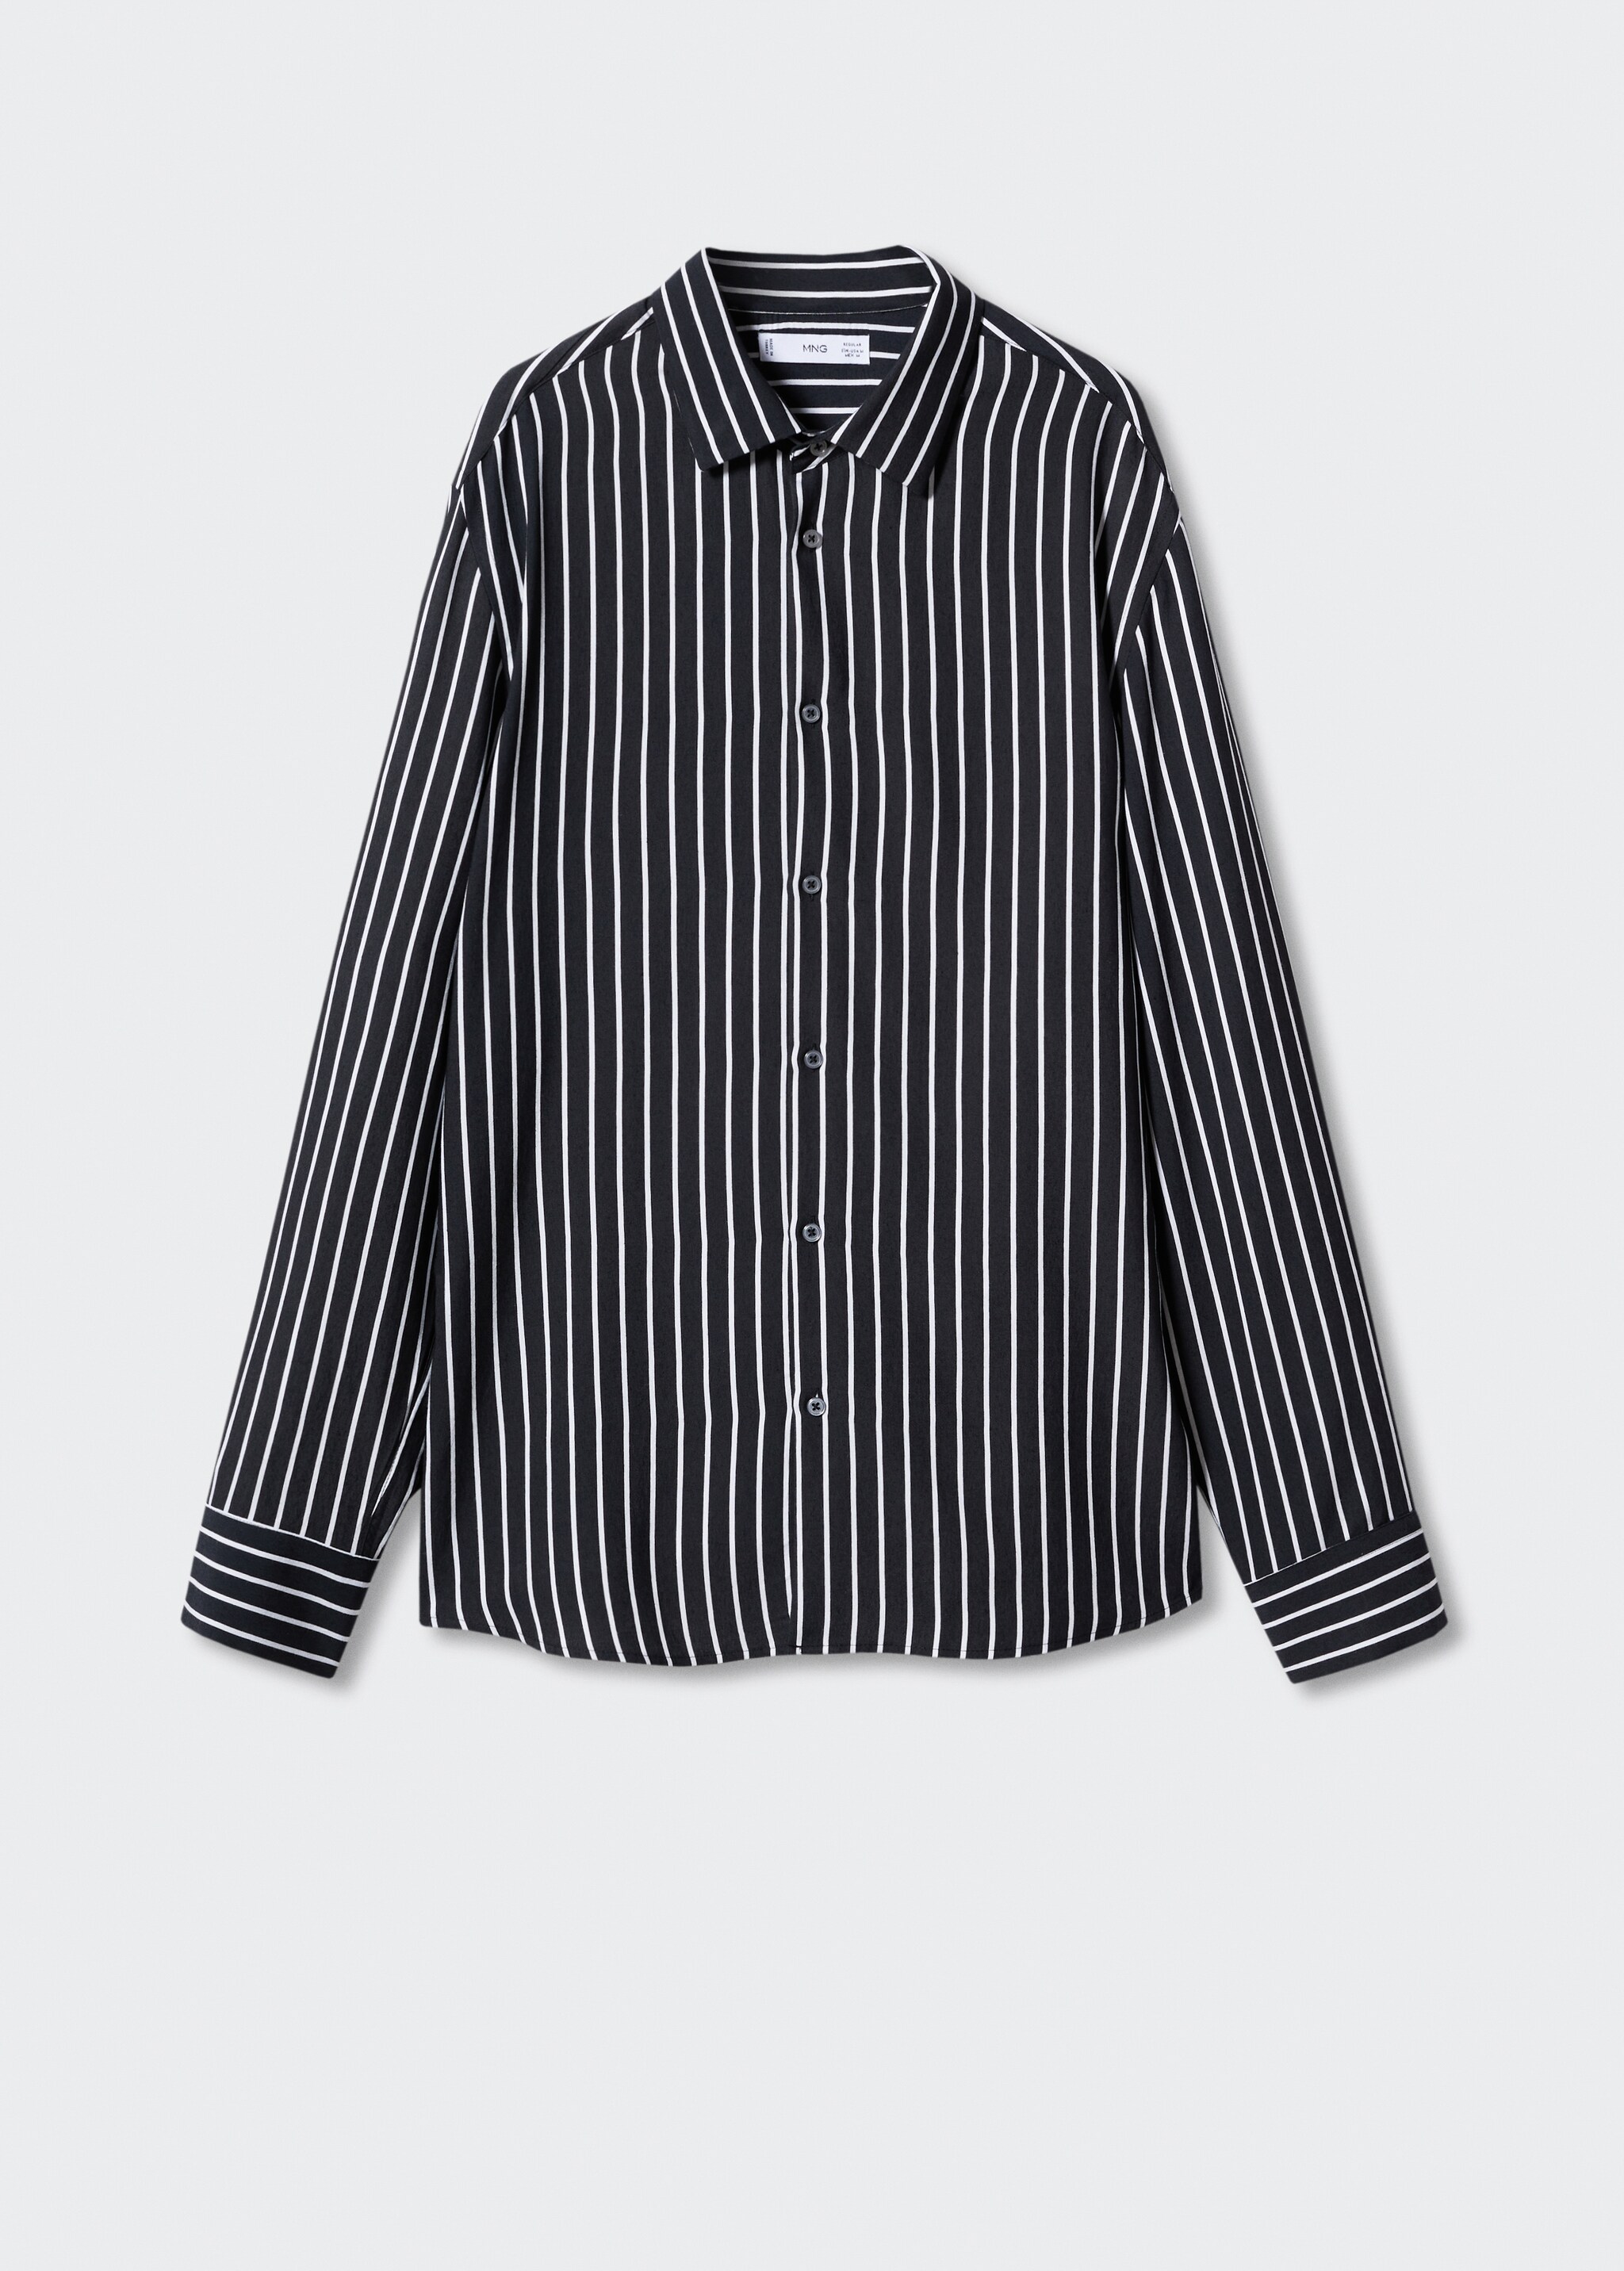 Striped flowy shirt - Article without model